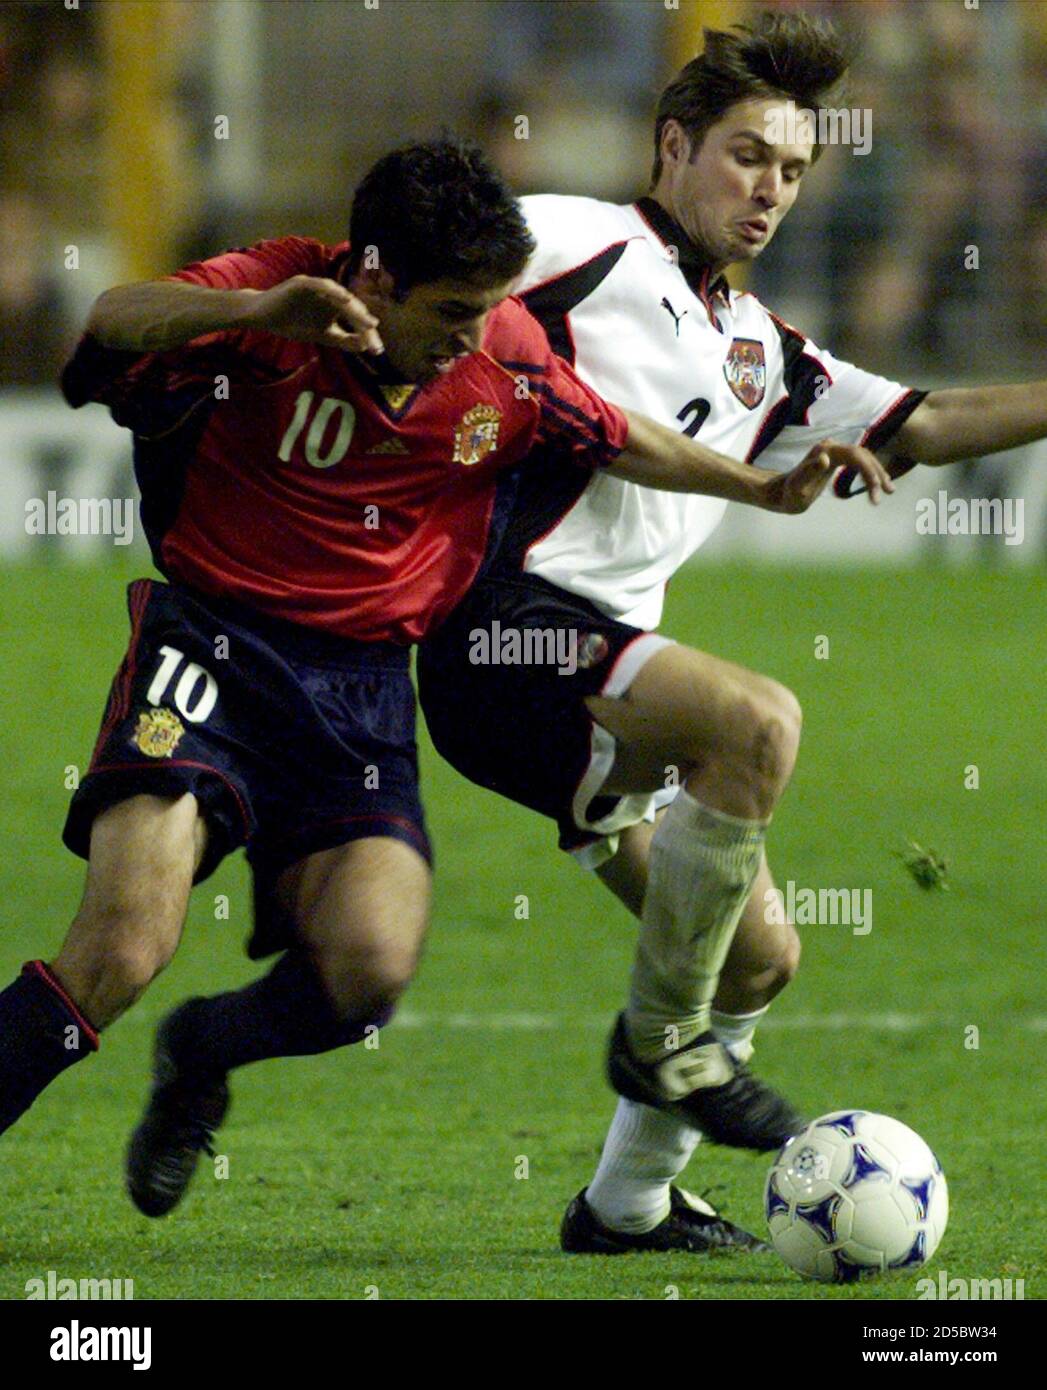 Spanish Raul Gonzalez (L) battles for the ball with Austrian Harald Cerny during their Euro 2000 group six qualifying soccer match in Mestalla stadium March 27. Spain won 9-0 and Raul scored four goals in the match.  SP/CLH/ Stock Photo